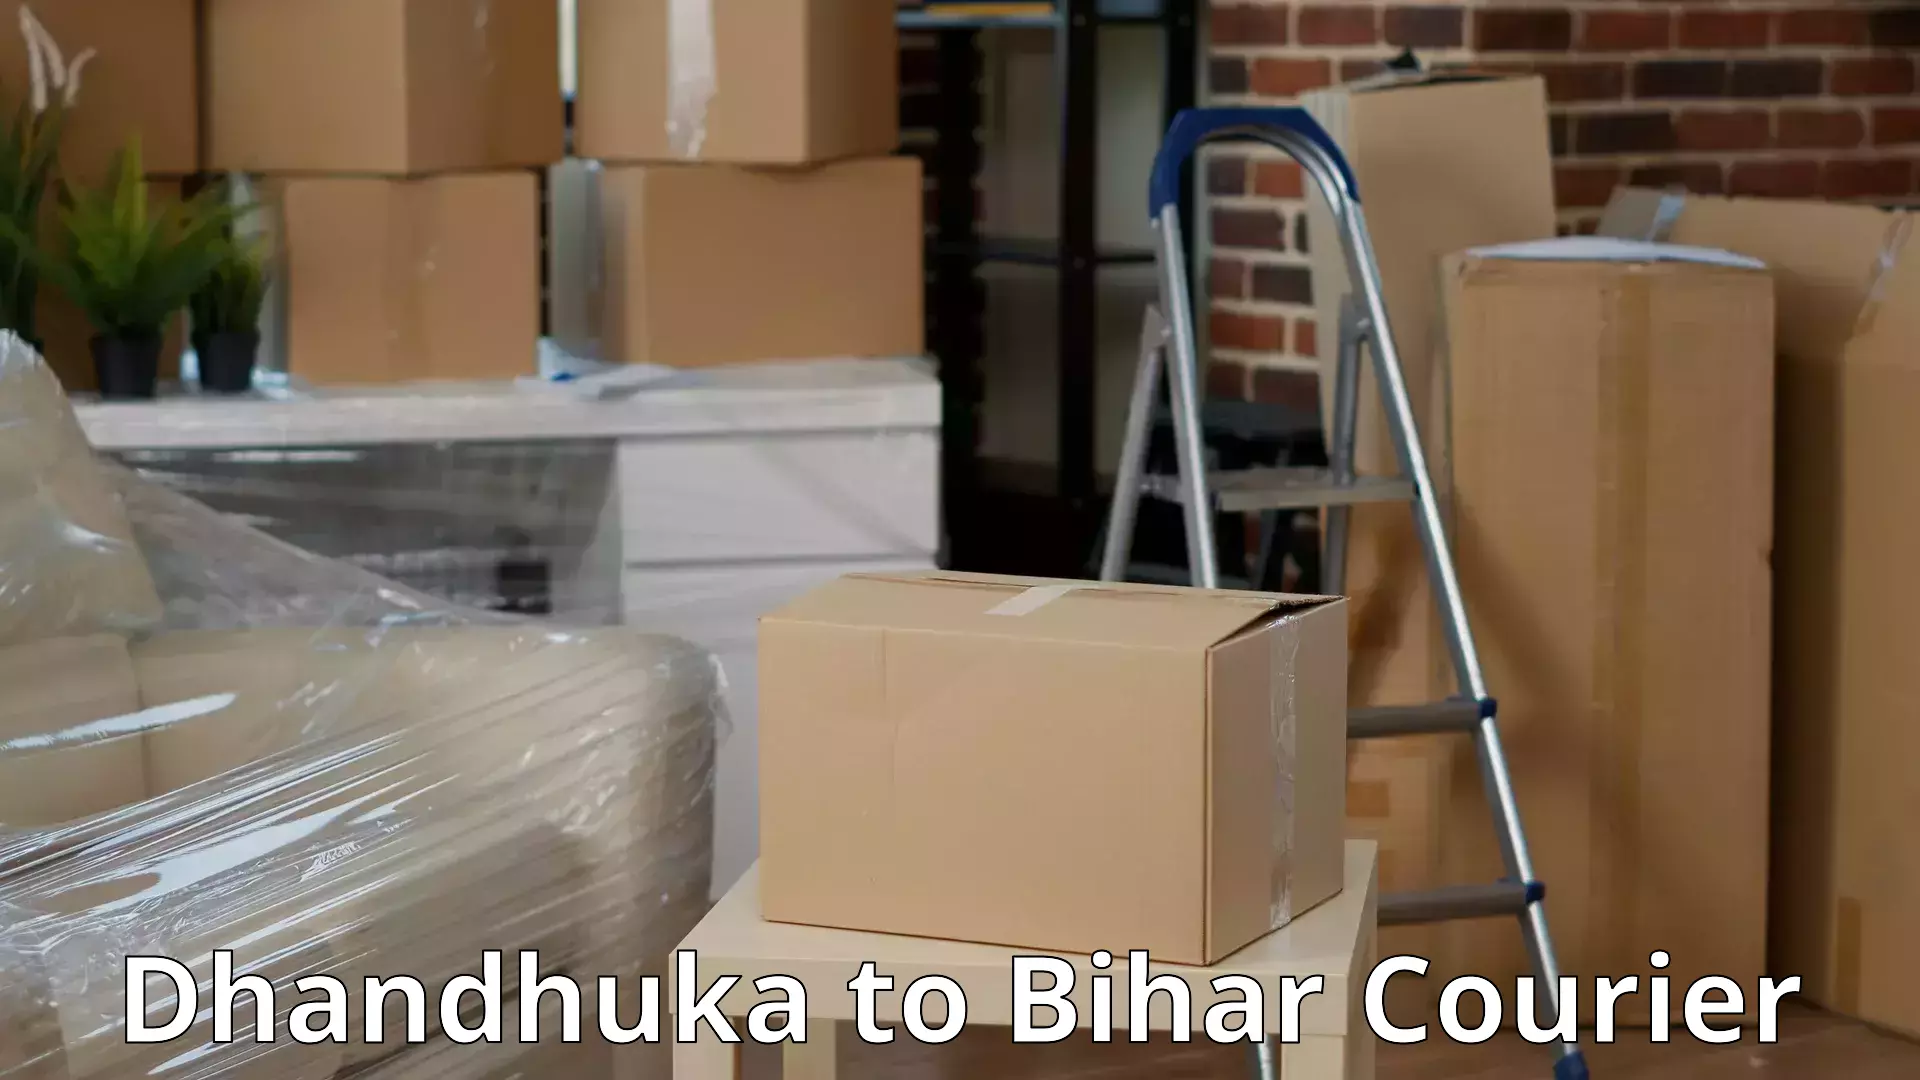 Moving and packing experts Dhandhuka to Bettiah